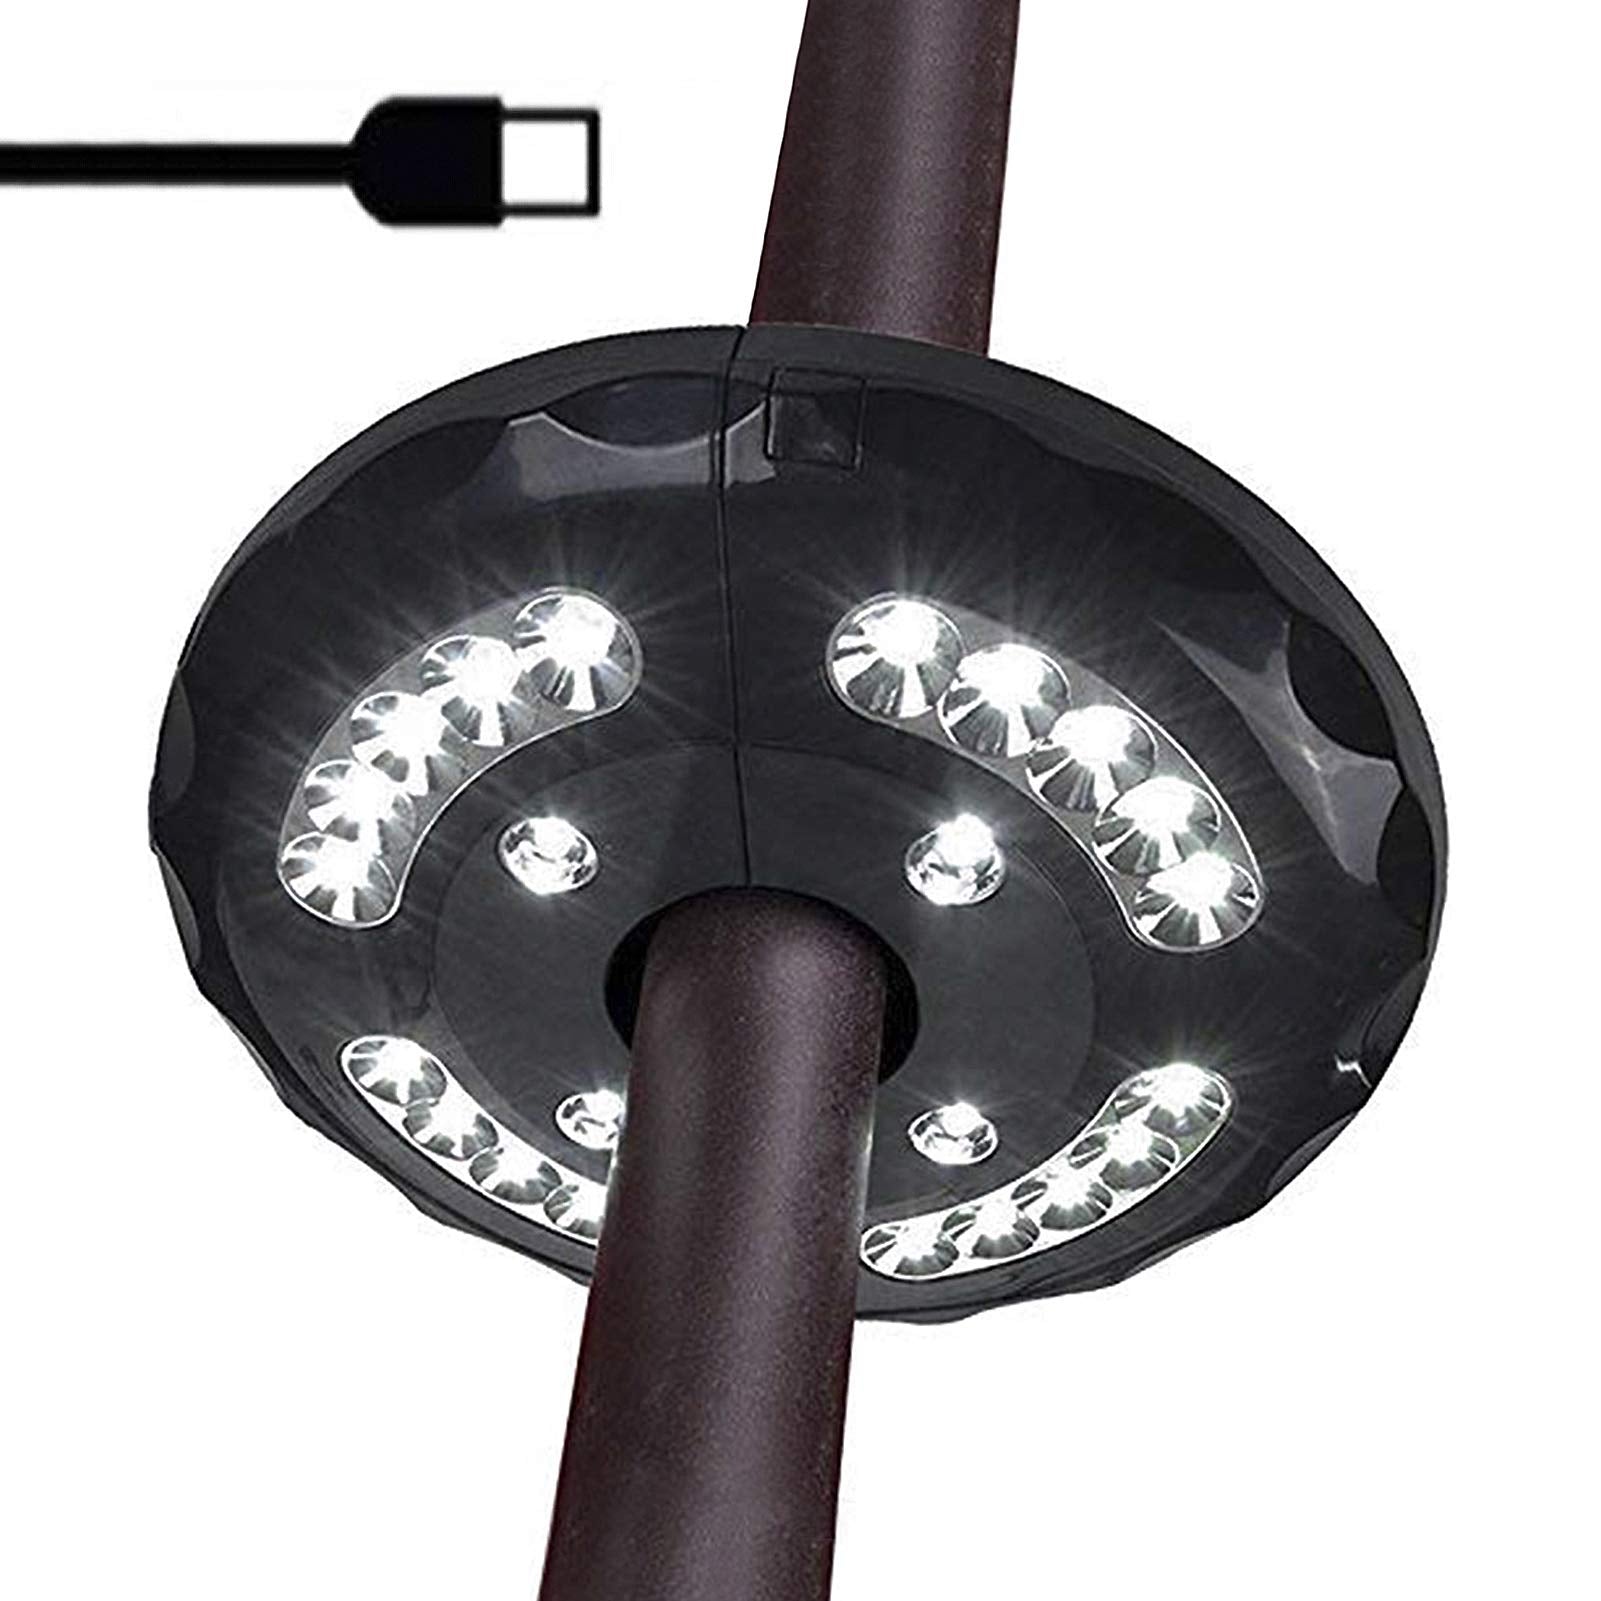 LVERSE Parasol Lights, USB Rechargeable LED Umbrella Lights, 3 Brightness Modes Cordless Parasol led Lights for Garden Patio Umbrellas, Camping Tents or Outdoor BBQ Use